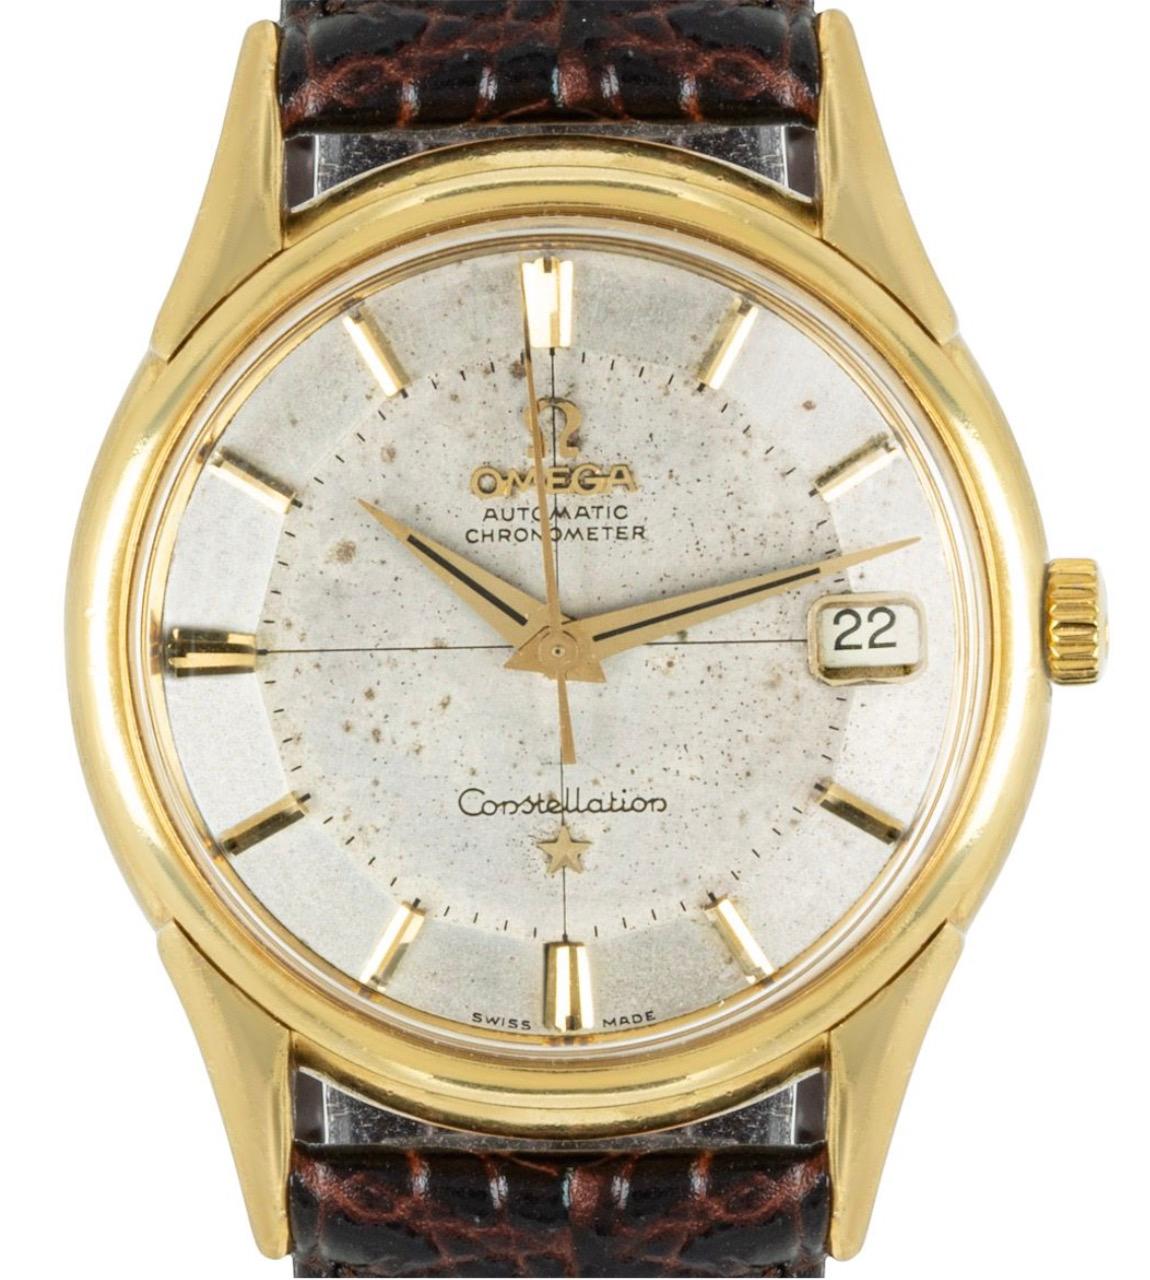 A vintage Omega Consteallion wristwatch in yellow gold. Features a distinctive pie pan dial with applied hour markers, a date aperture and a yellow gold bezel. The watch is further fitted with a plastic glass, a self-winding automatic movement and a